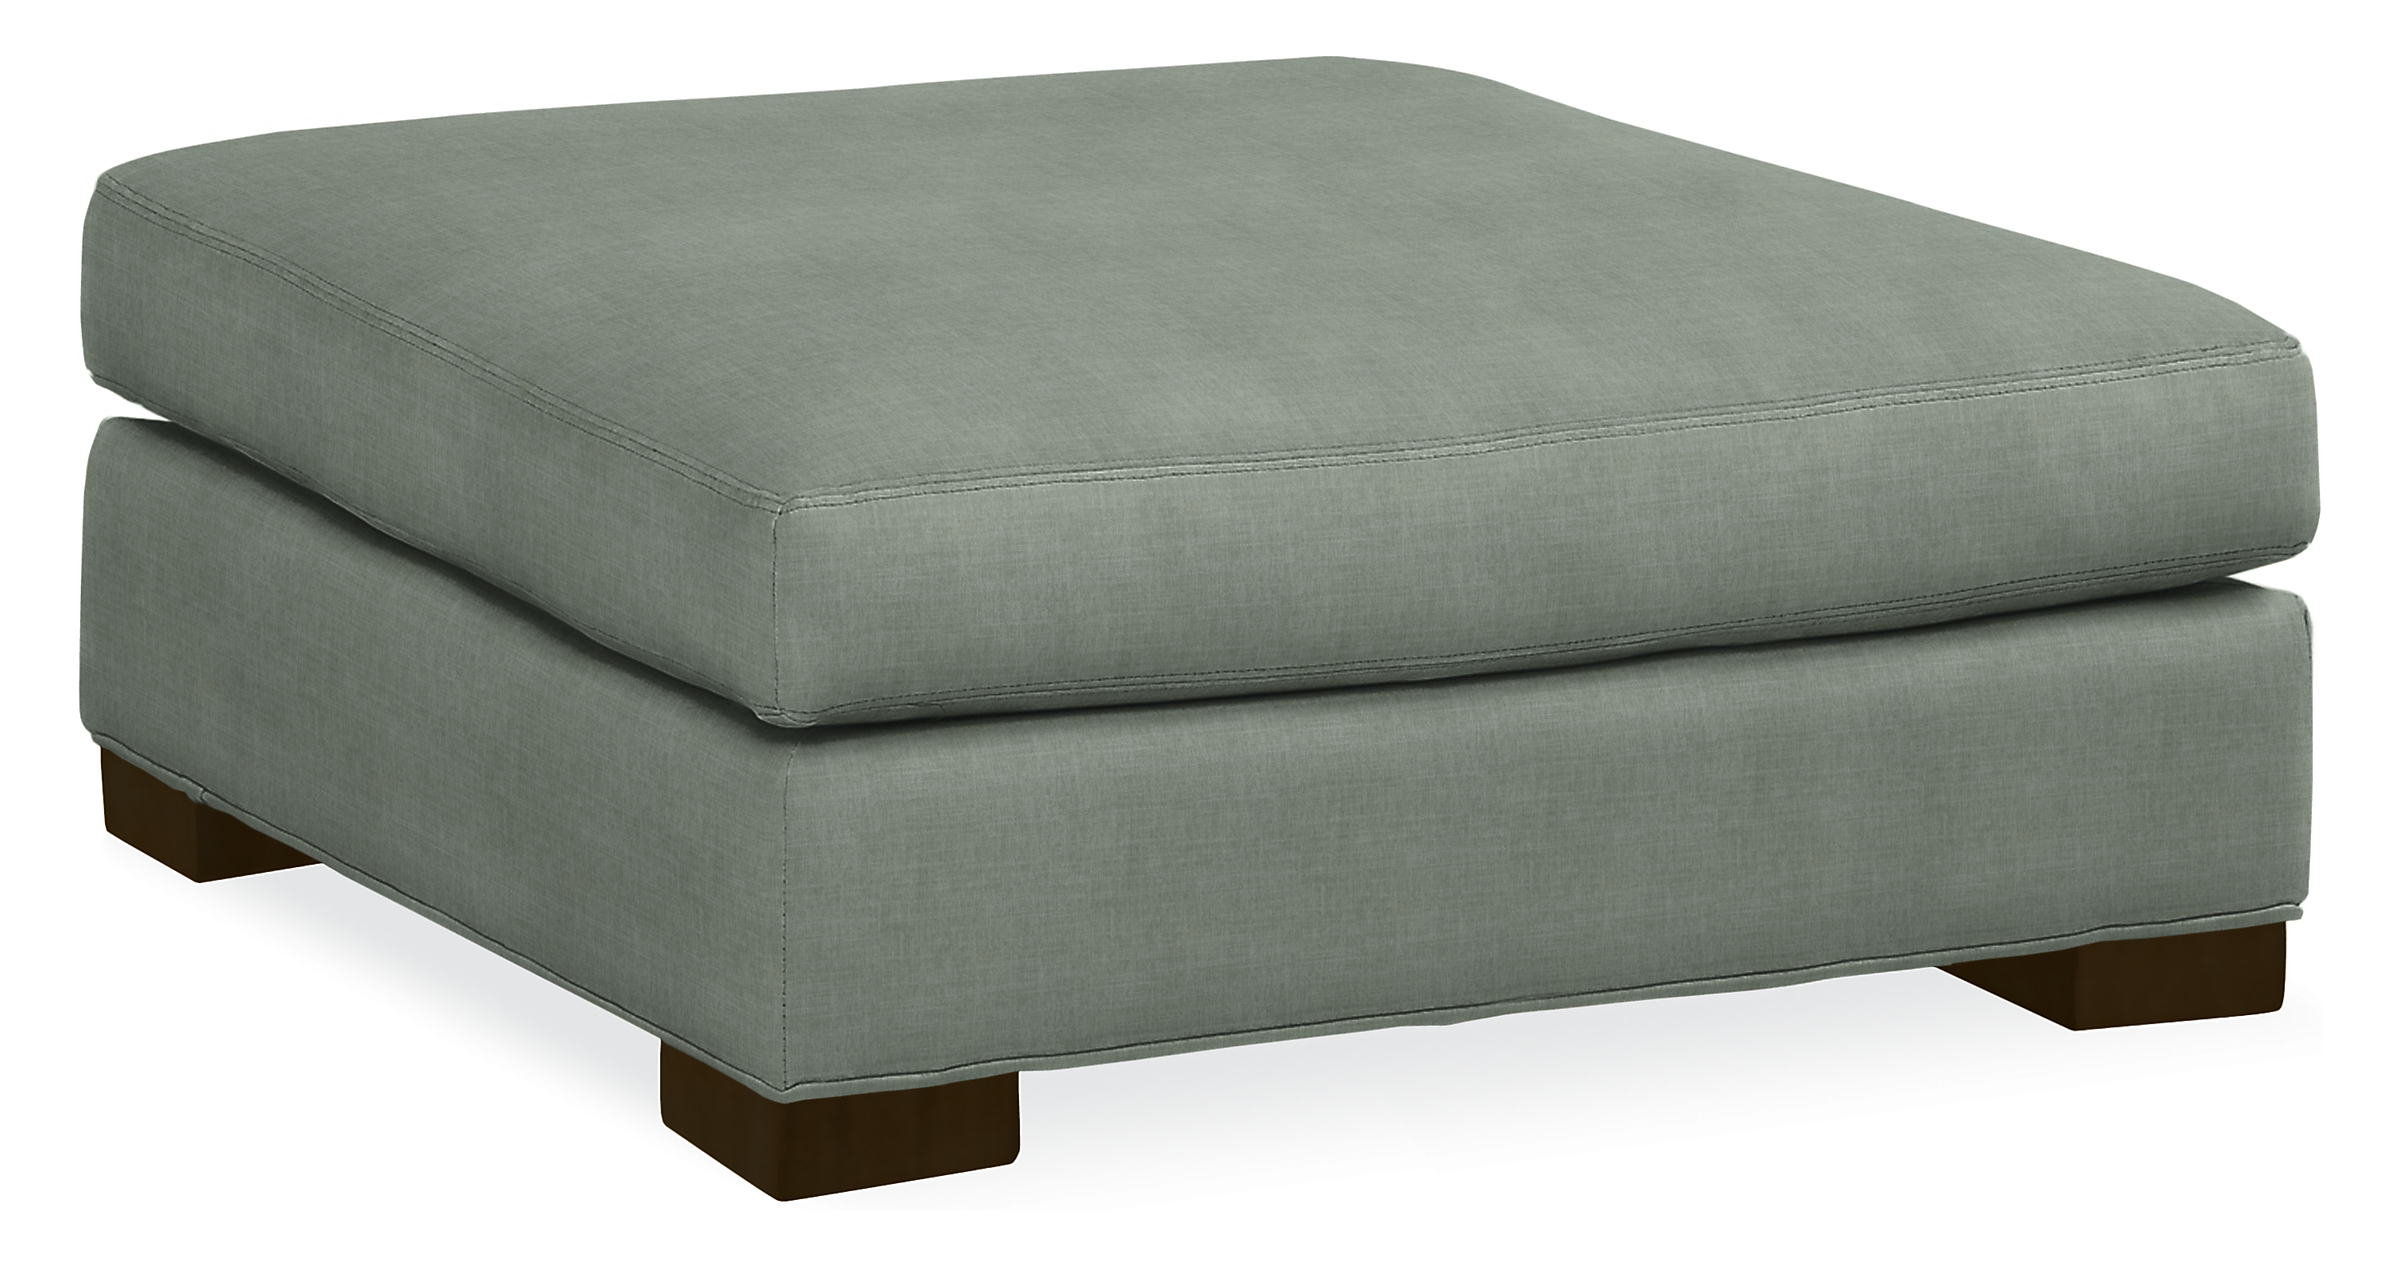 Metro 38w 38d 17h Square Ottoman in Mori Cloud with Charcoal Legs